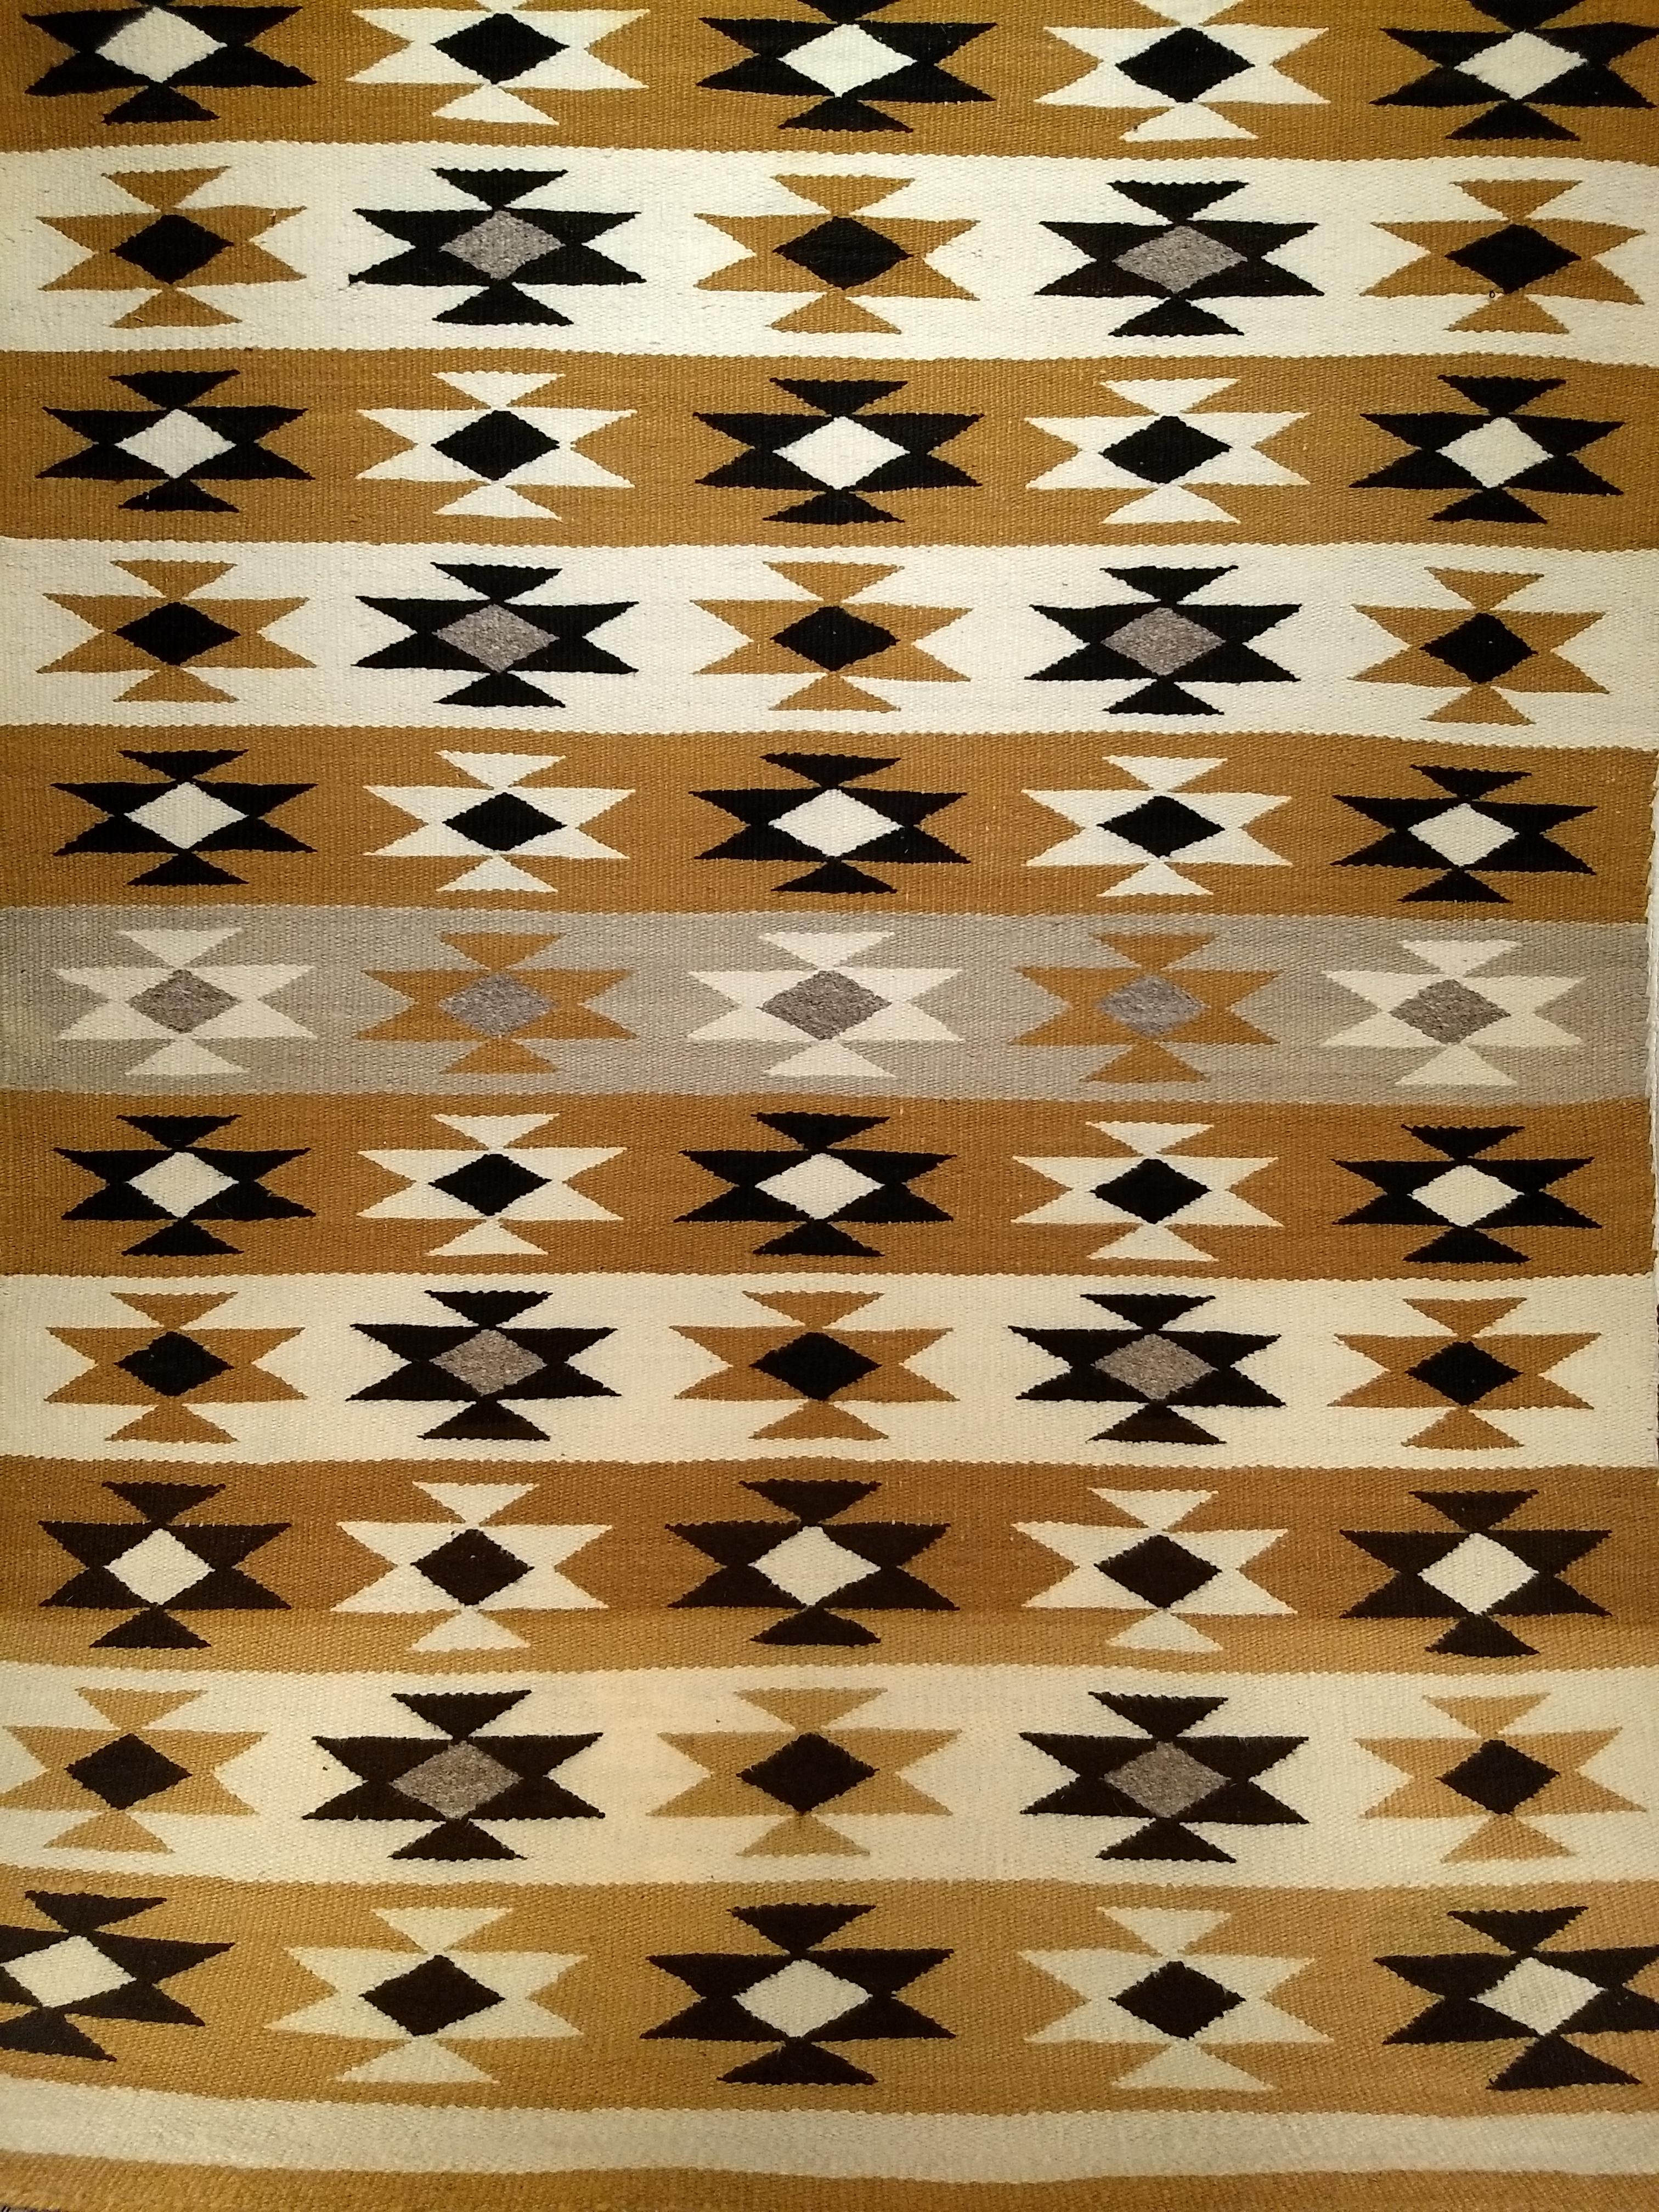 Vintage Native American Navajo Rug in a Chinle revival pattern in earth tone colors including yellow, brown, black, ivory, and gray.  The vintage Navajo rug is woven of native hand-spun wool in a Chinle revival pattern. This style of Navajo Regional